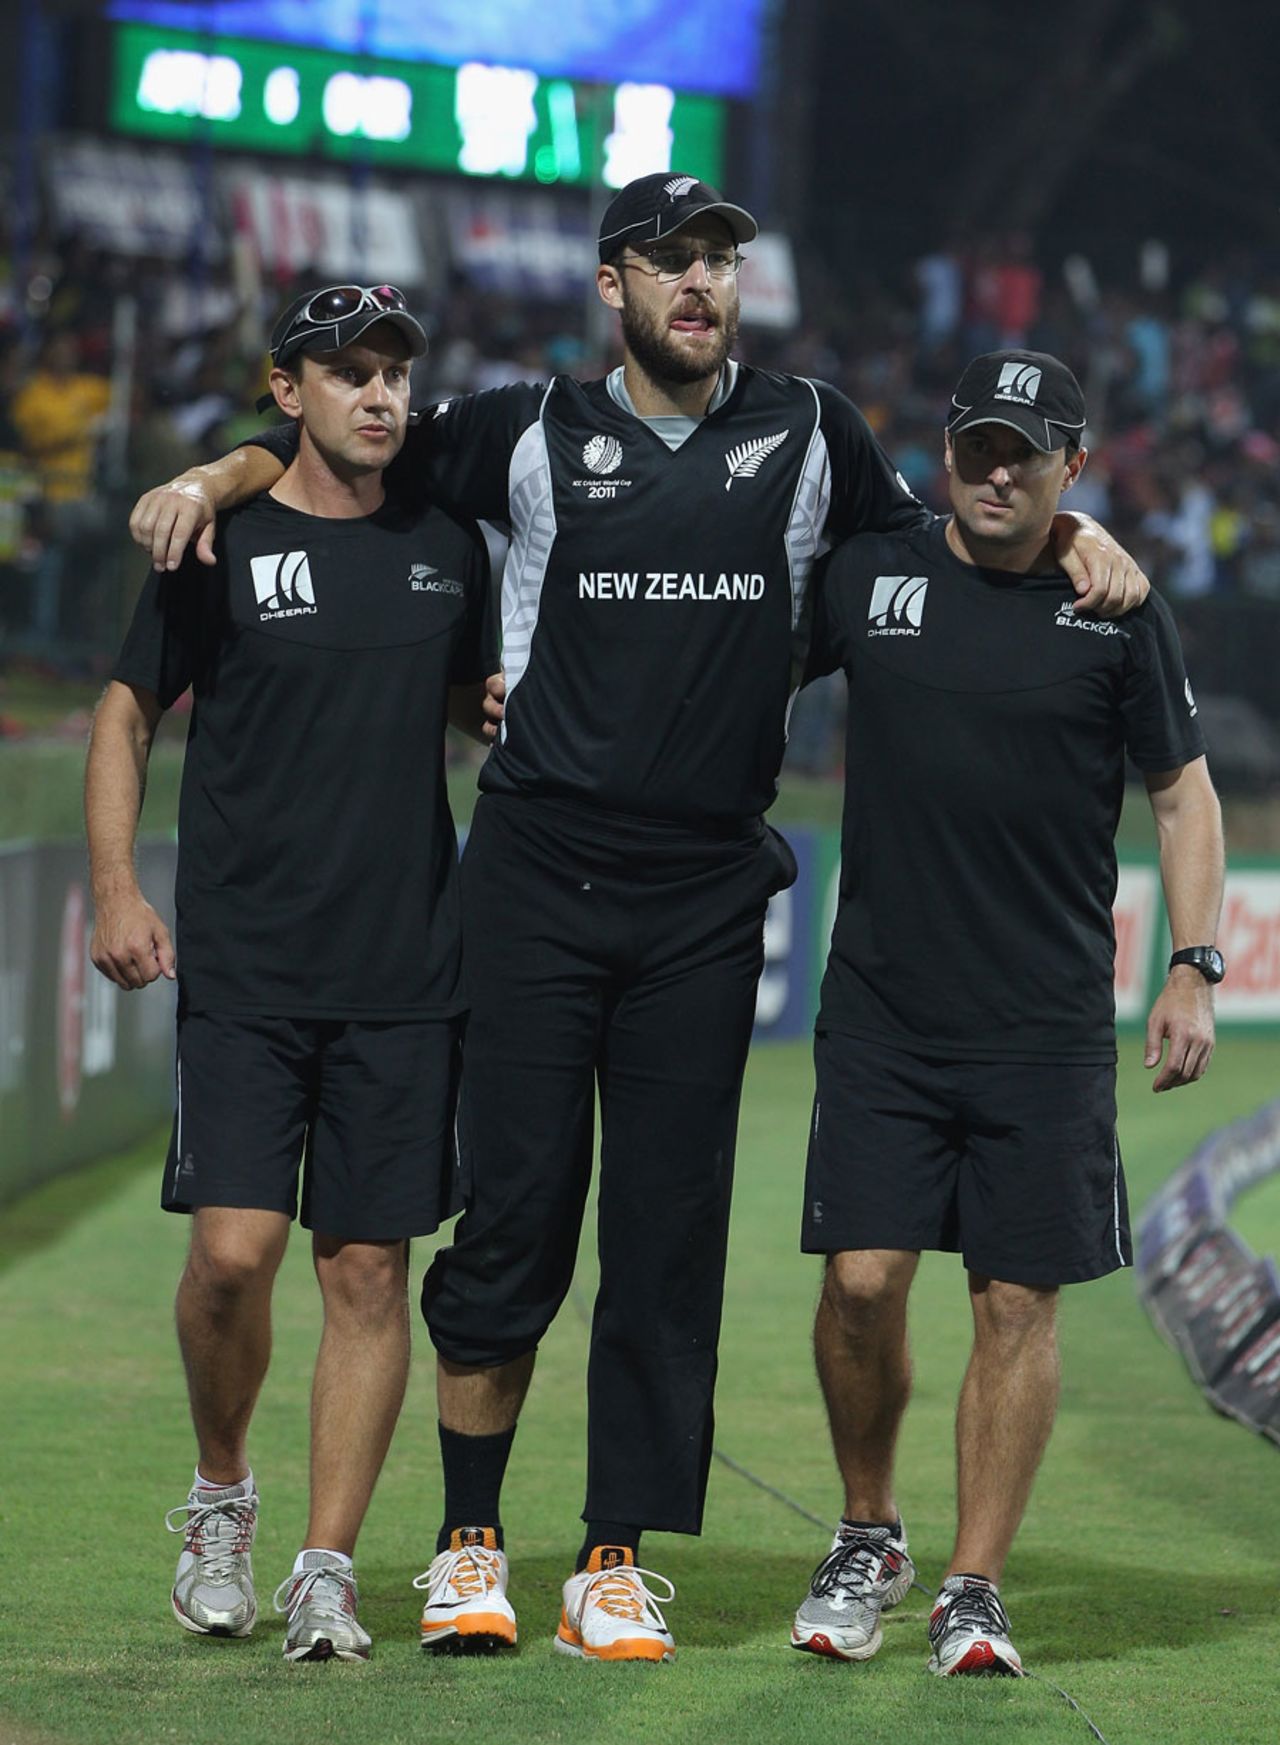 Daniel Vettori was assisted off the field after injuring his knee, New Zealand v Pakistan, Group A, World Cup, Pallekele, March 8, 2011